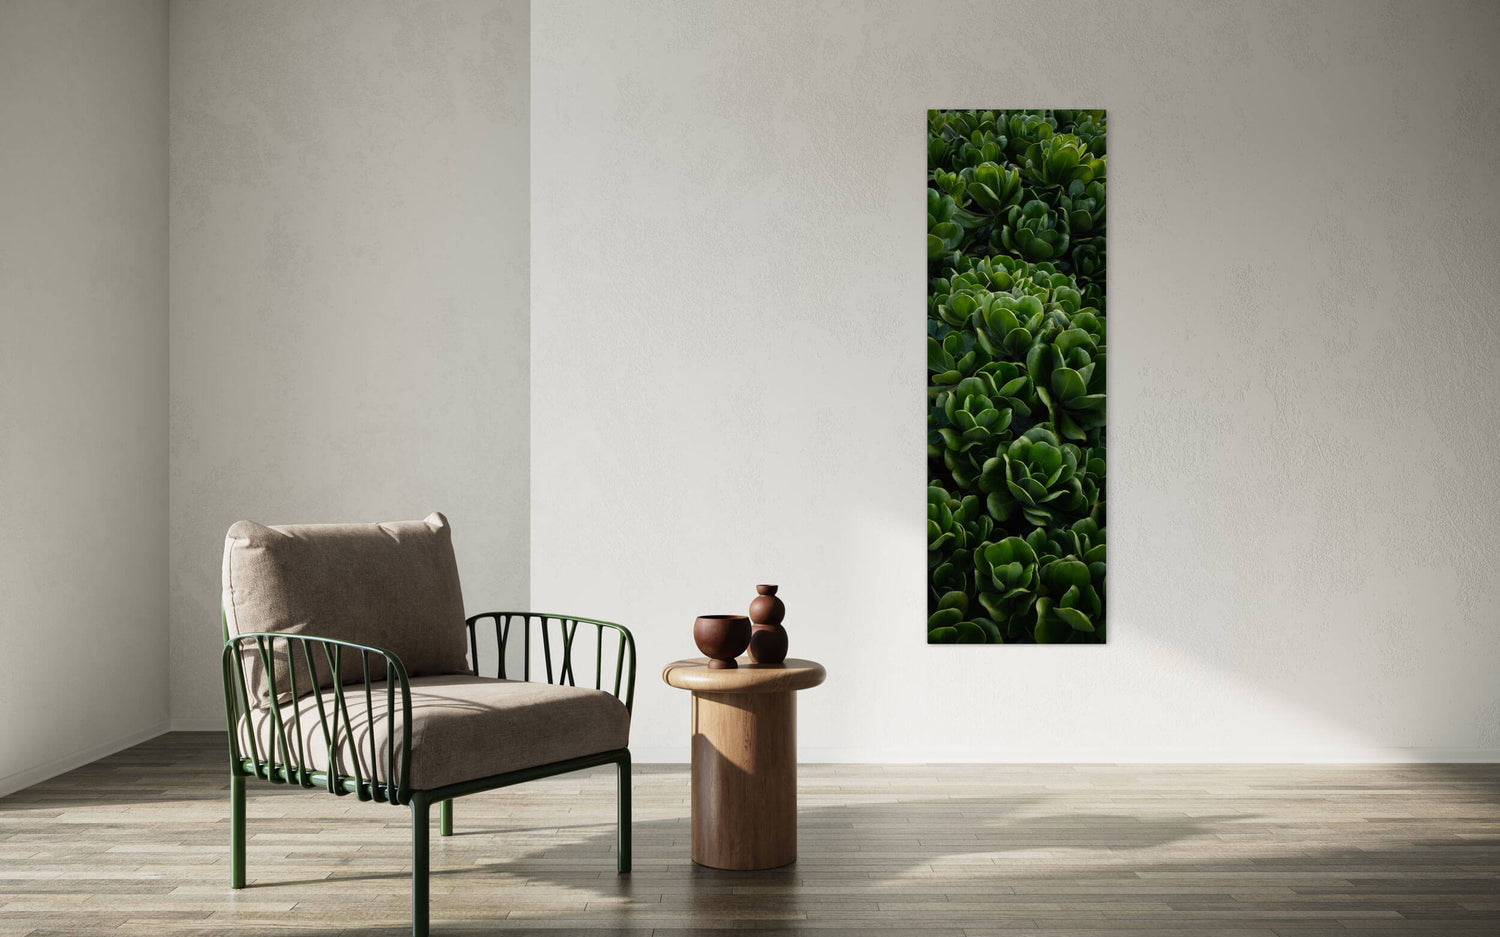 A Kauai plants picture hangs in a living room.